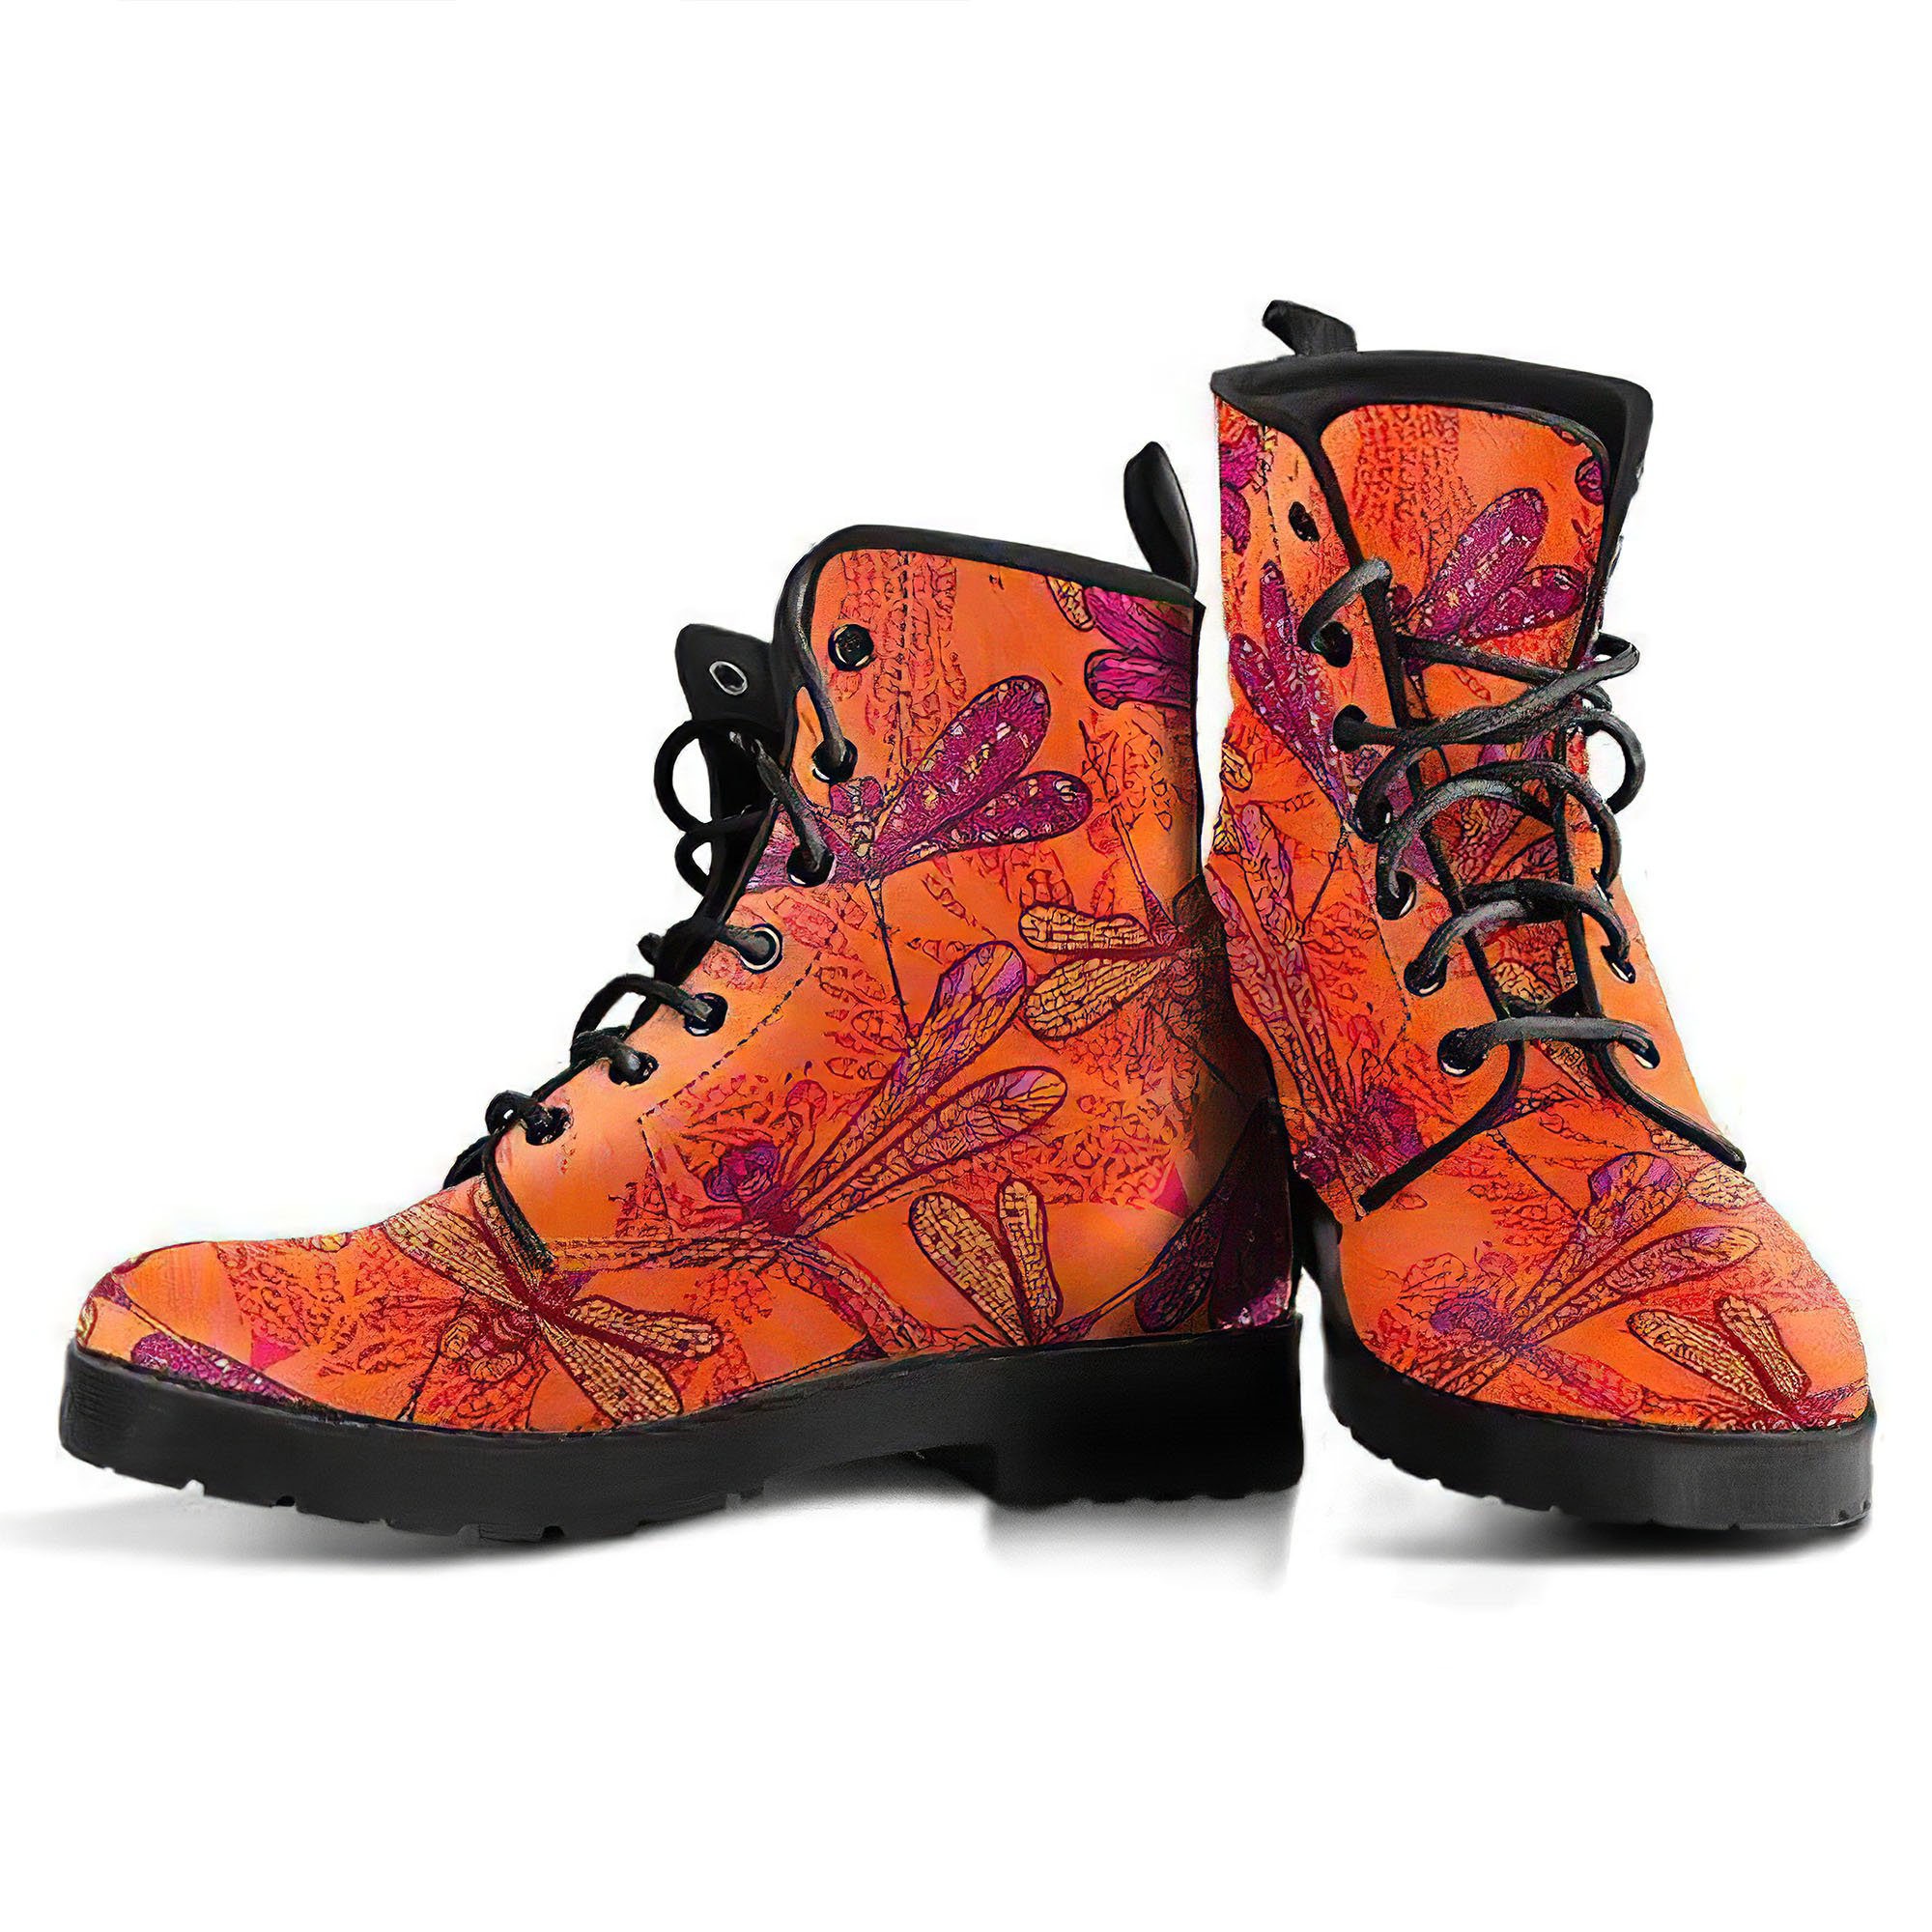 orange-dragonfly-handcrafted-boots-gp-main.jpg